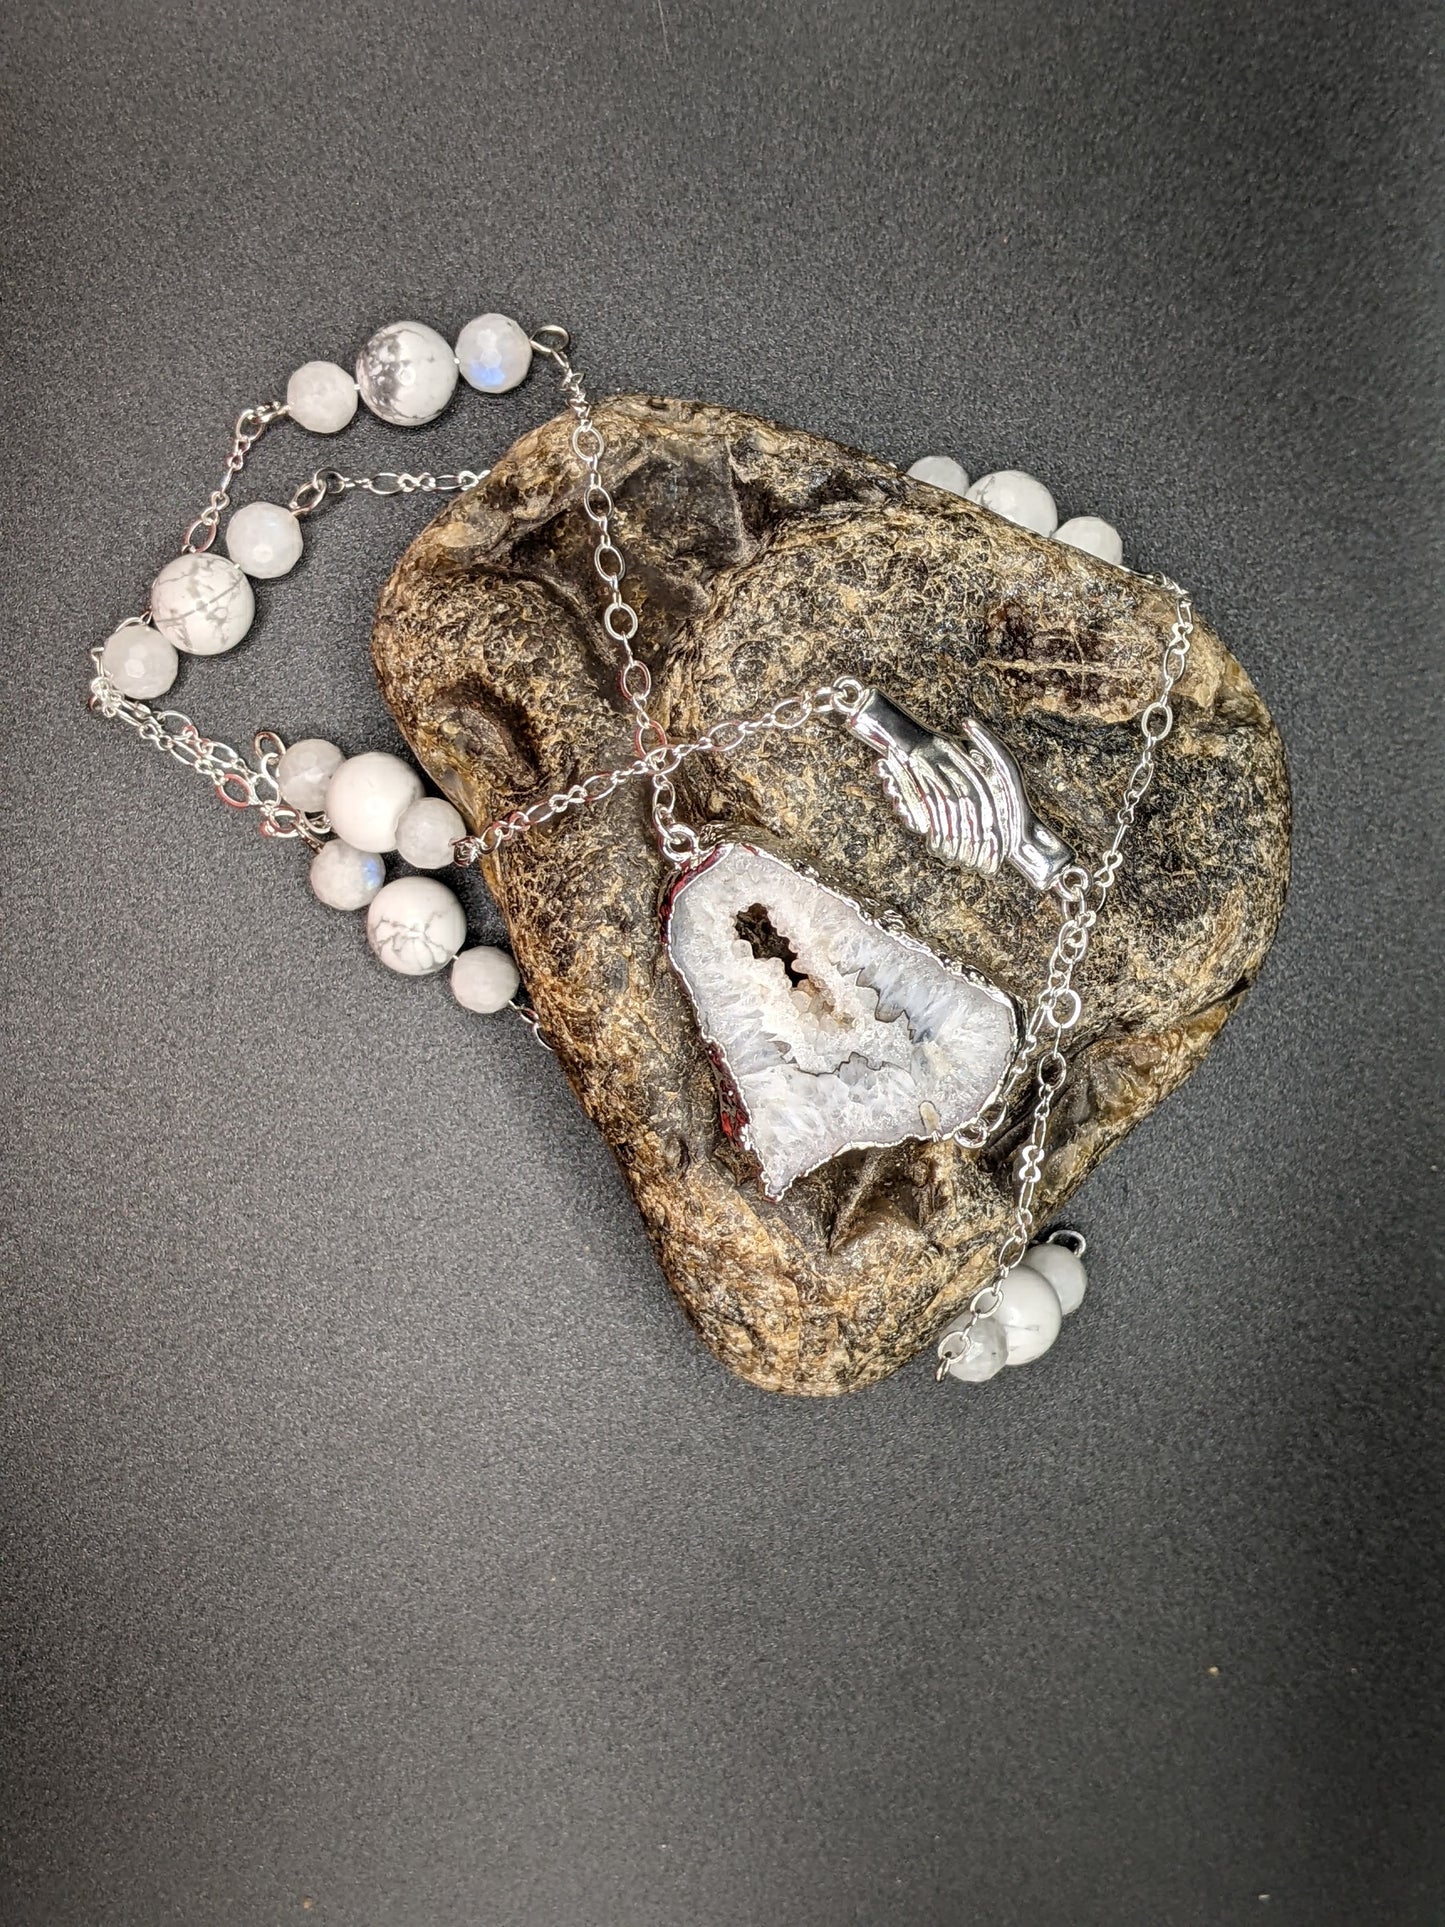 Geode Slice Necklace w  Moonstone & Howlite accents Silvertone X-Long 28"